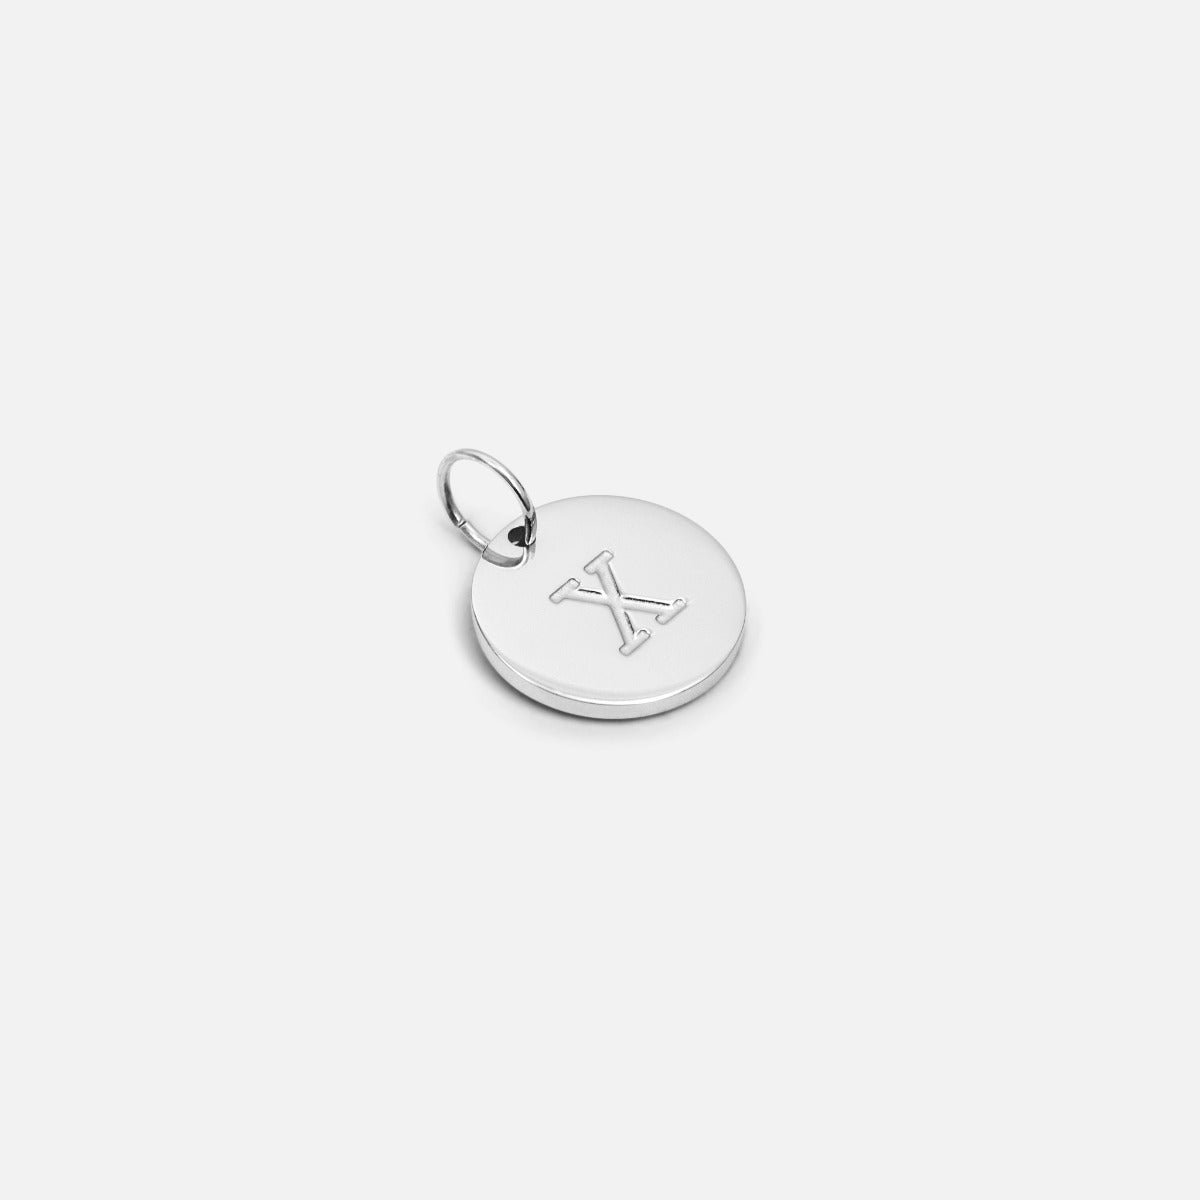 Small symbolic silvered charm engraved with the letter of the alphabet "x"